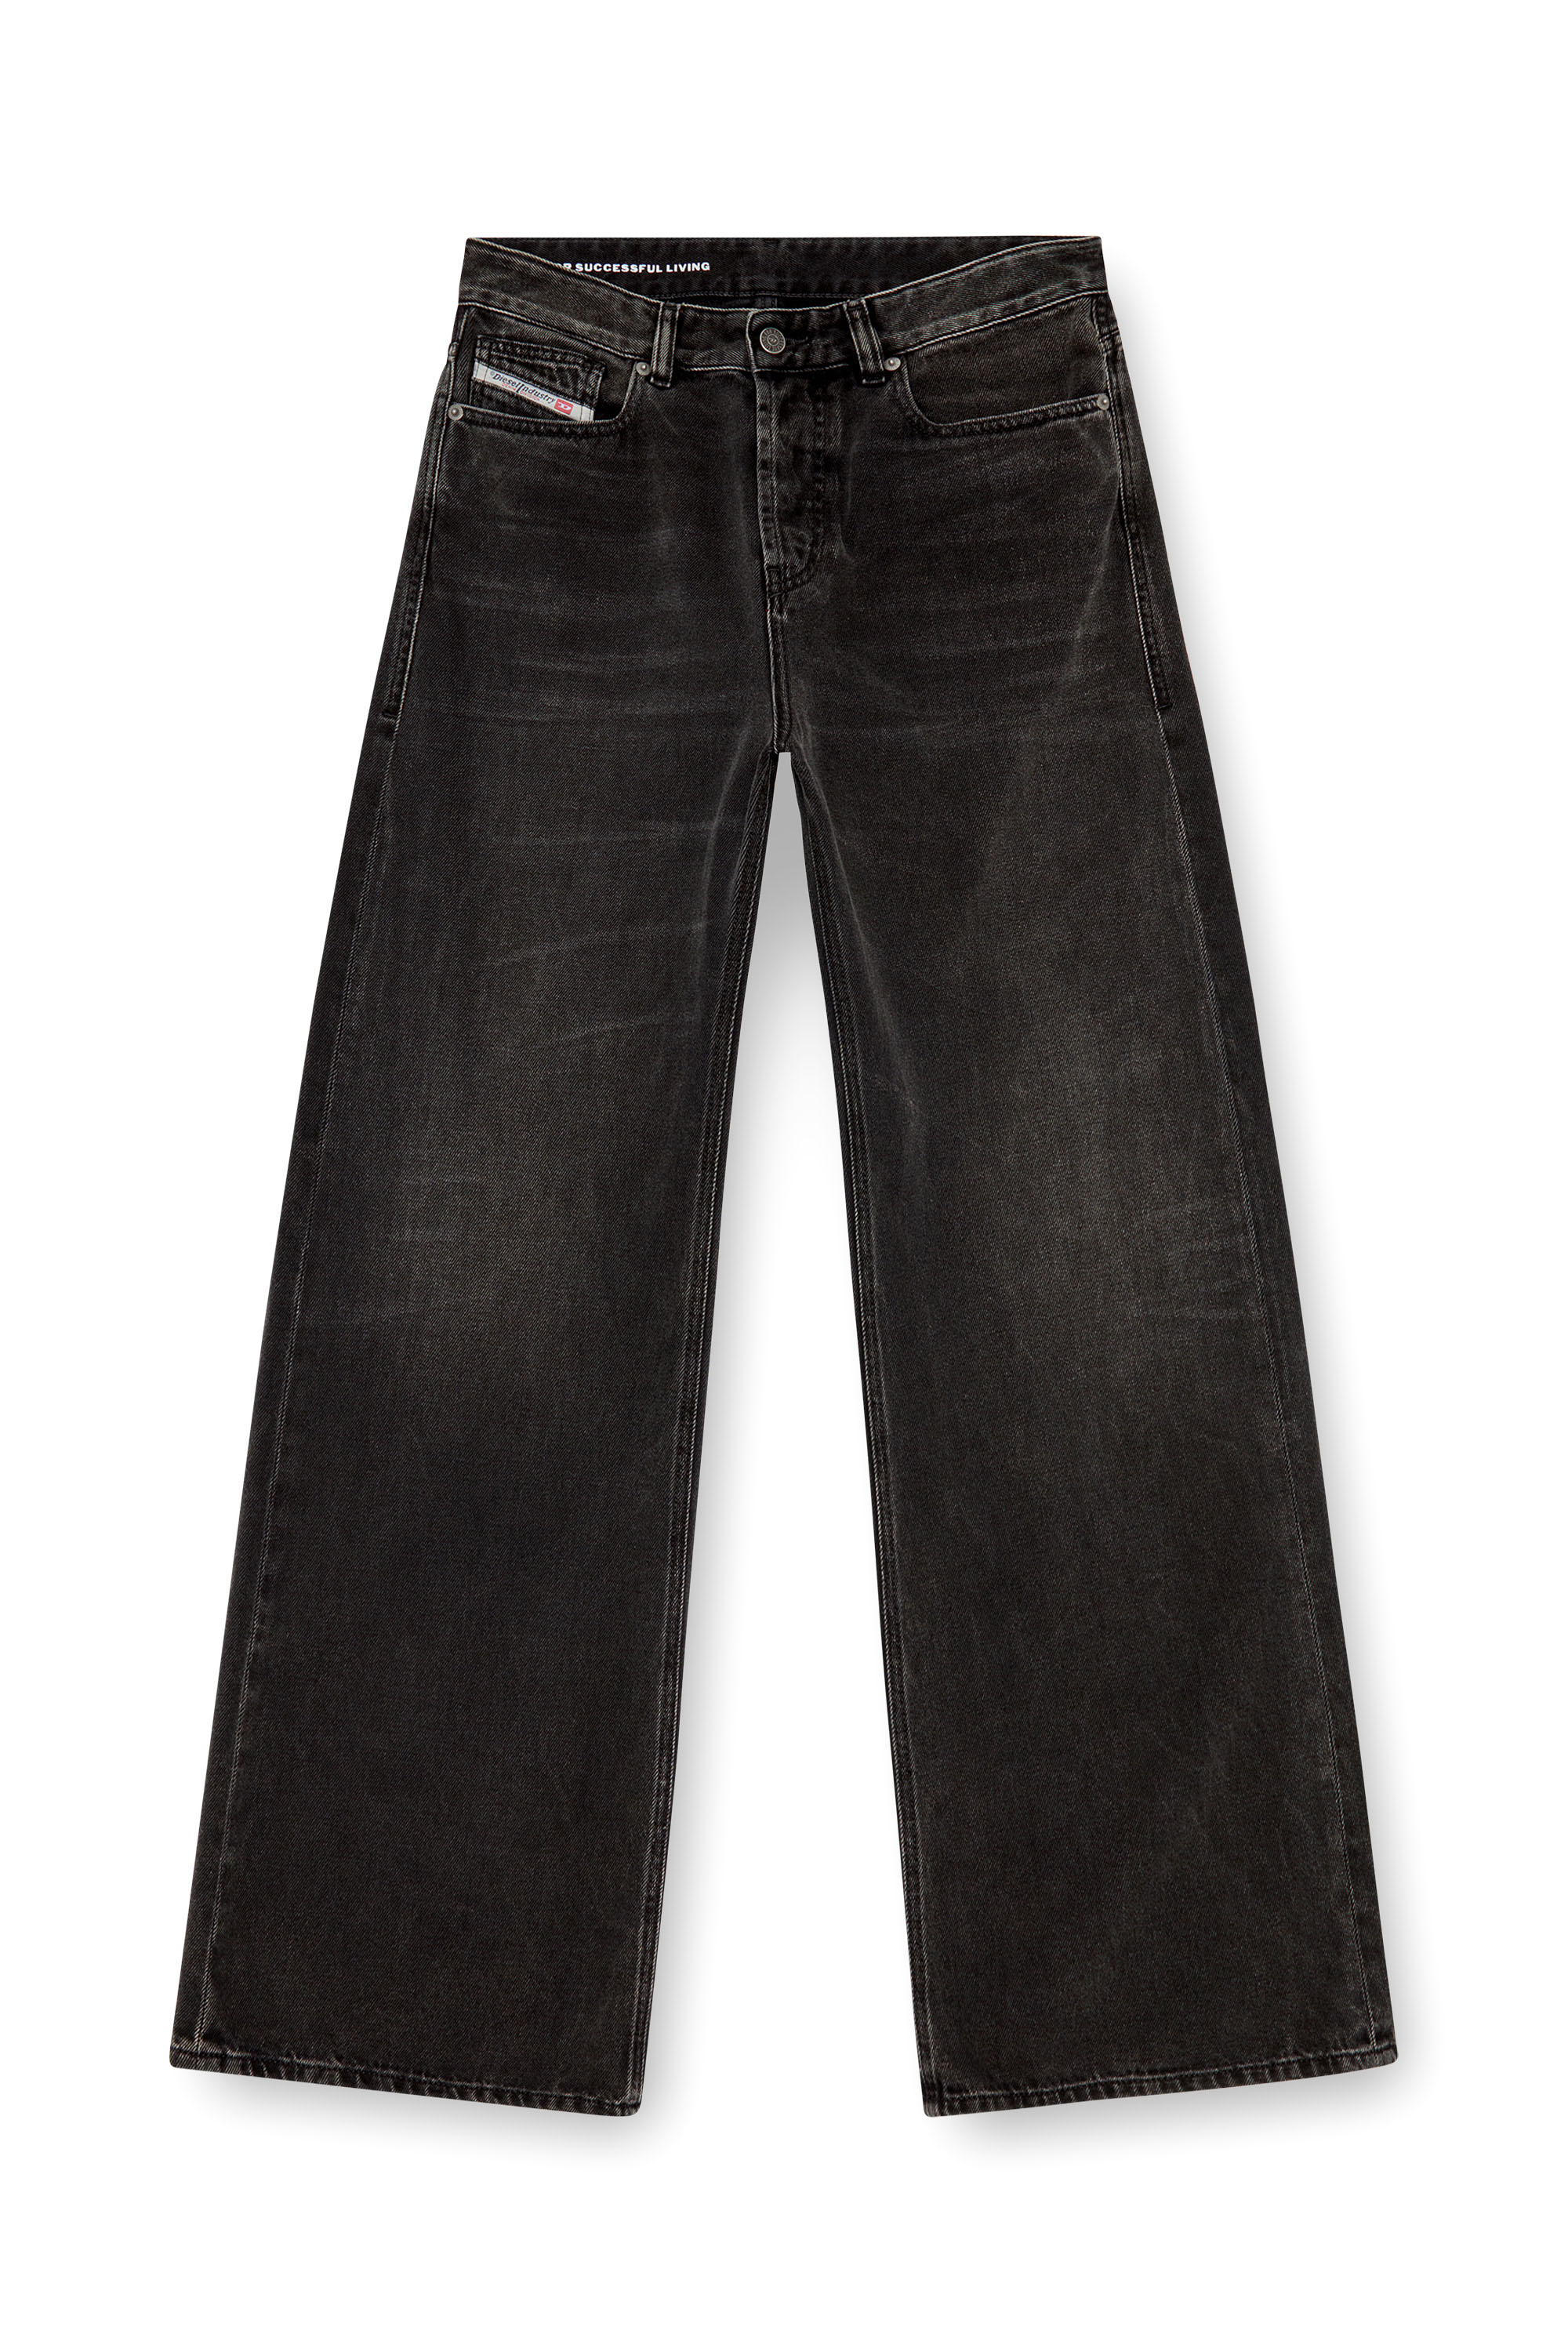 Diesel - Straight Jeans 1996 D-Sire 09J96, Mujer Straight Jeans - 1996 D-Sire in Negro - Image 3